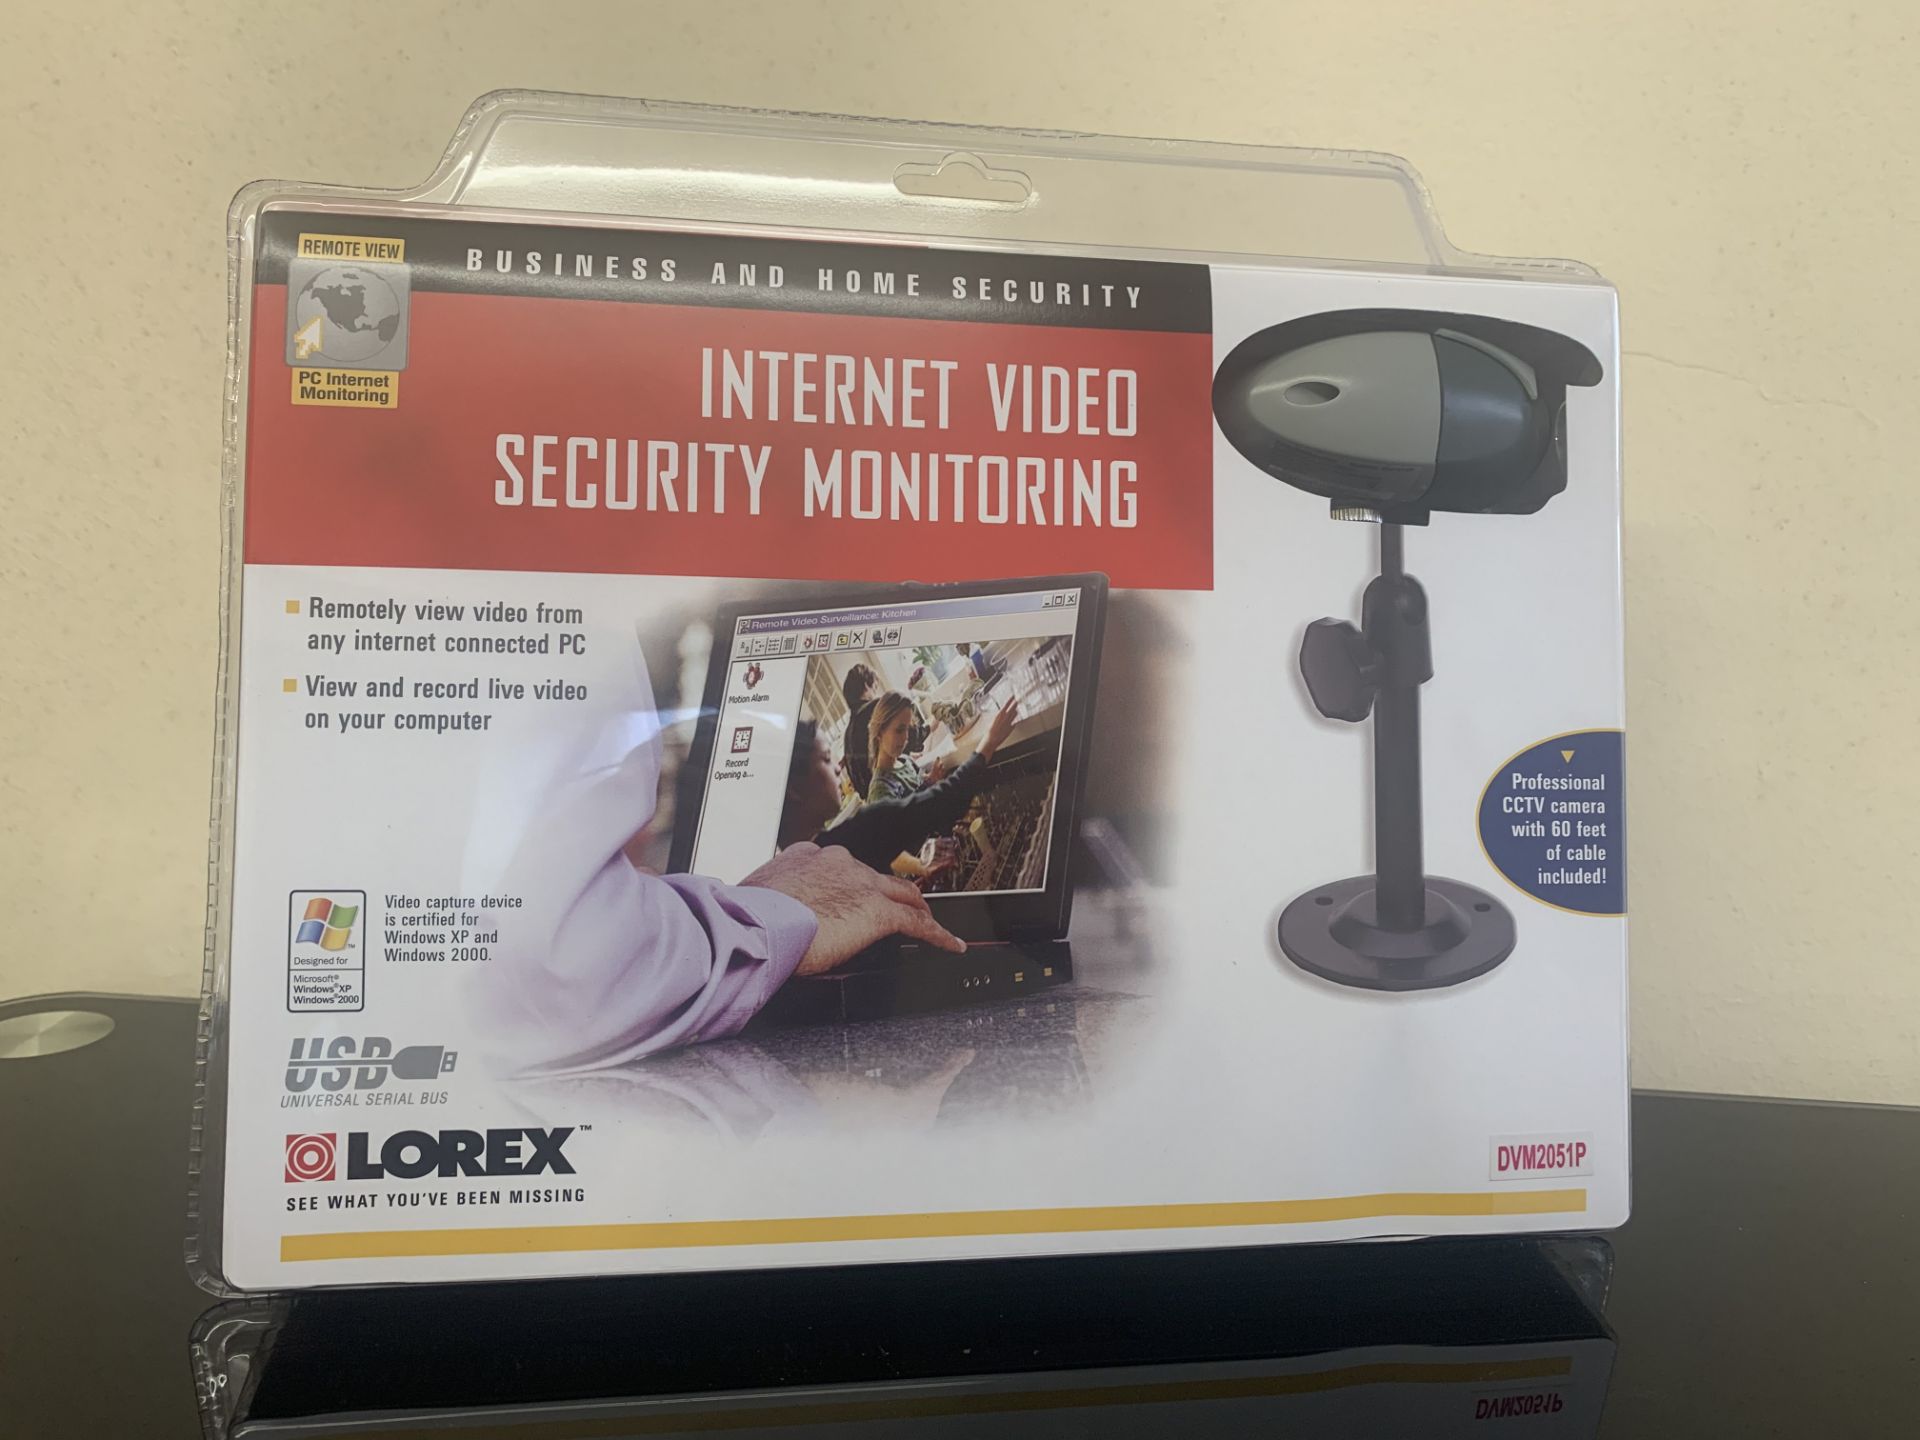 8 X LOREX BUSINESS AND HOME SECURITY INTERNET VIDEO SECURITY MONITORING